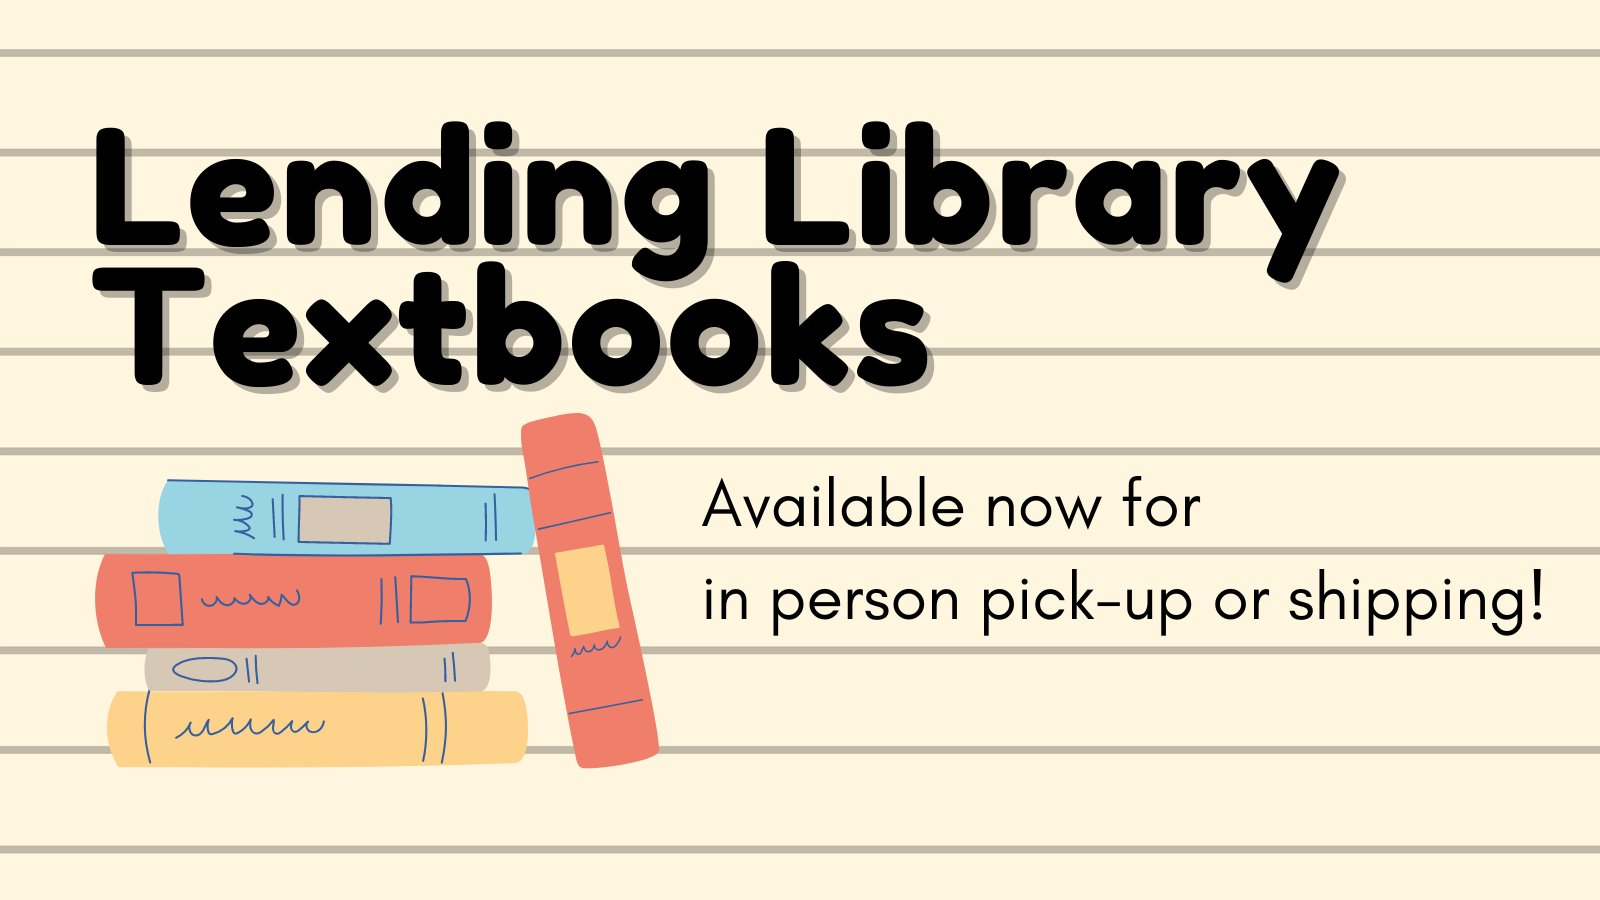 Lending Library Textbooks. Available now for in person pick-up or shipping!